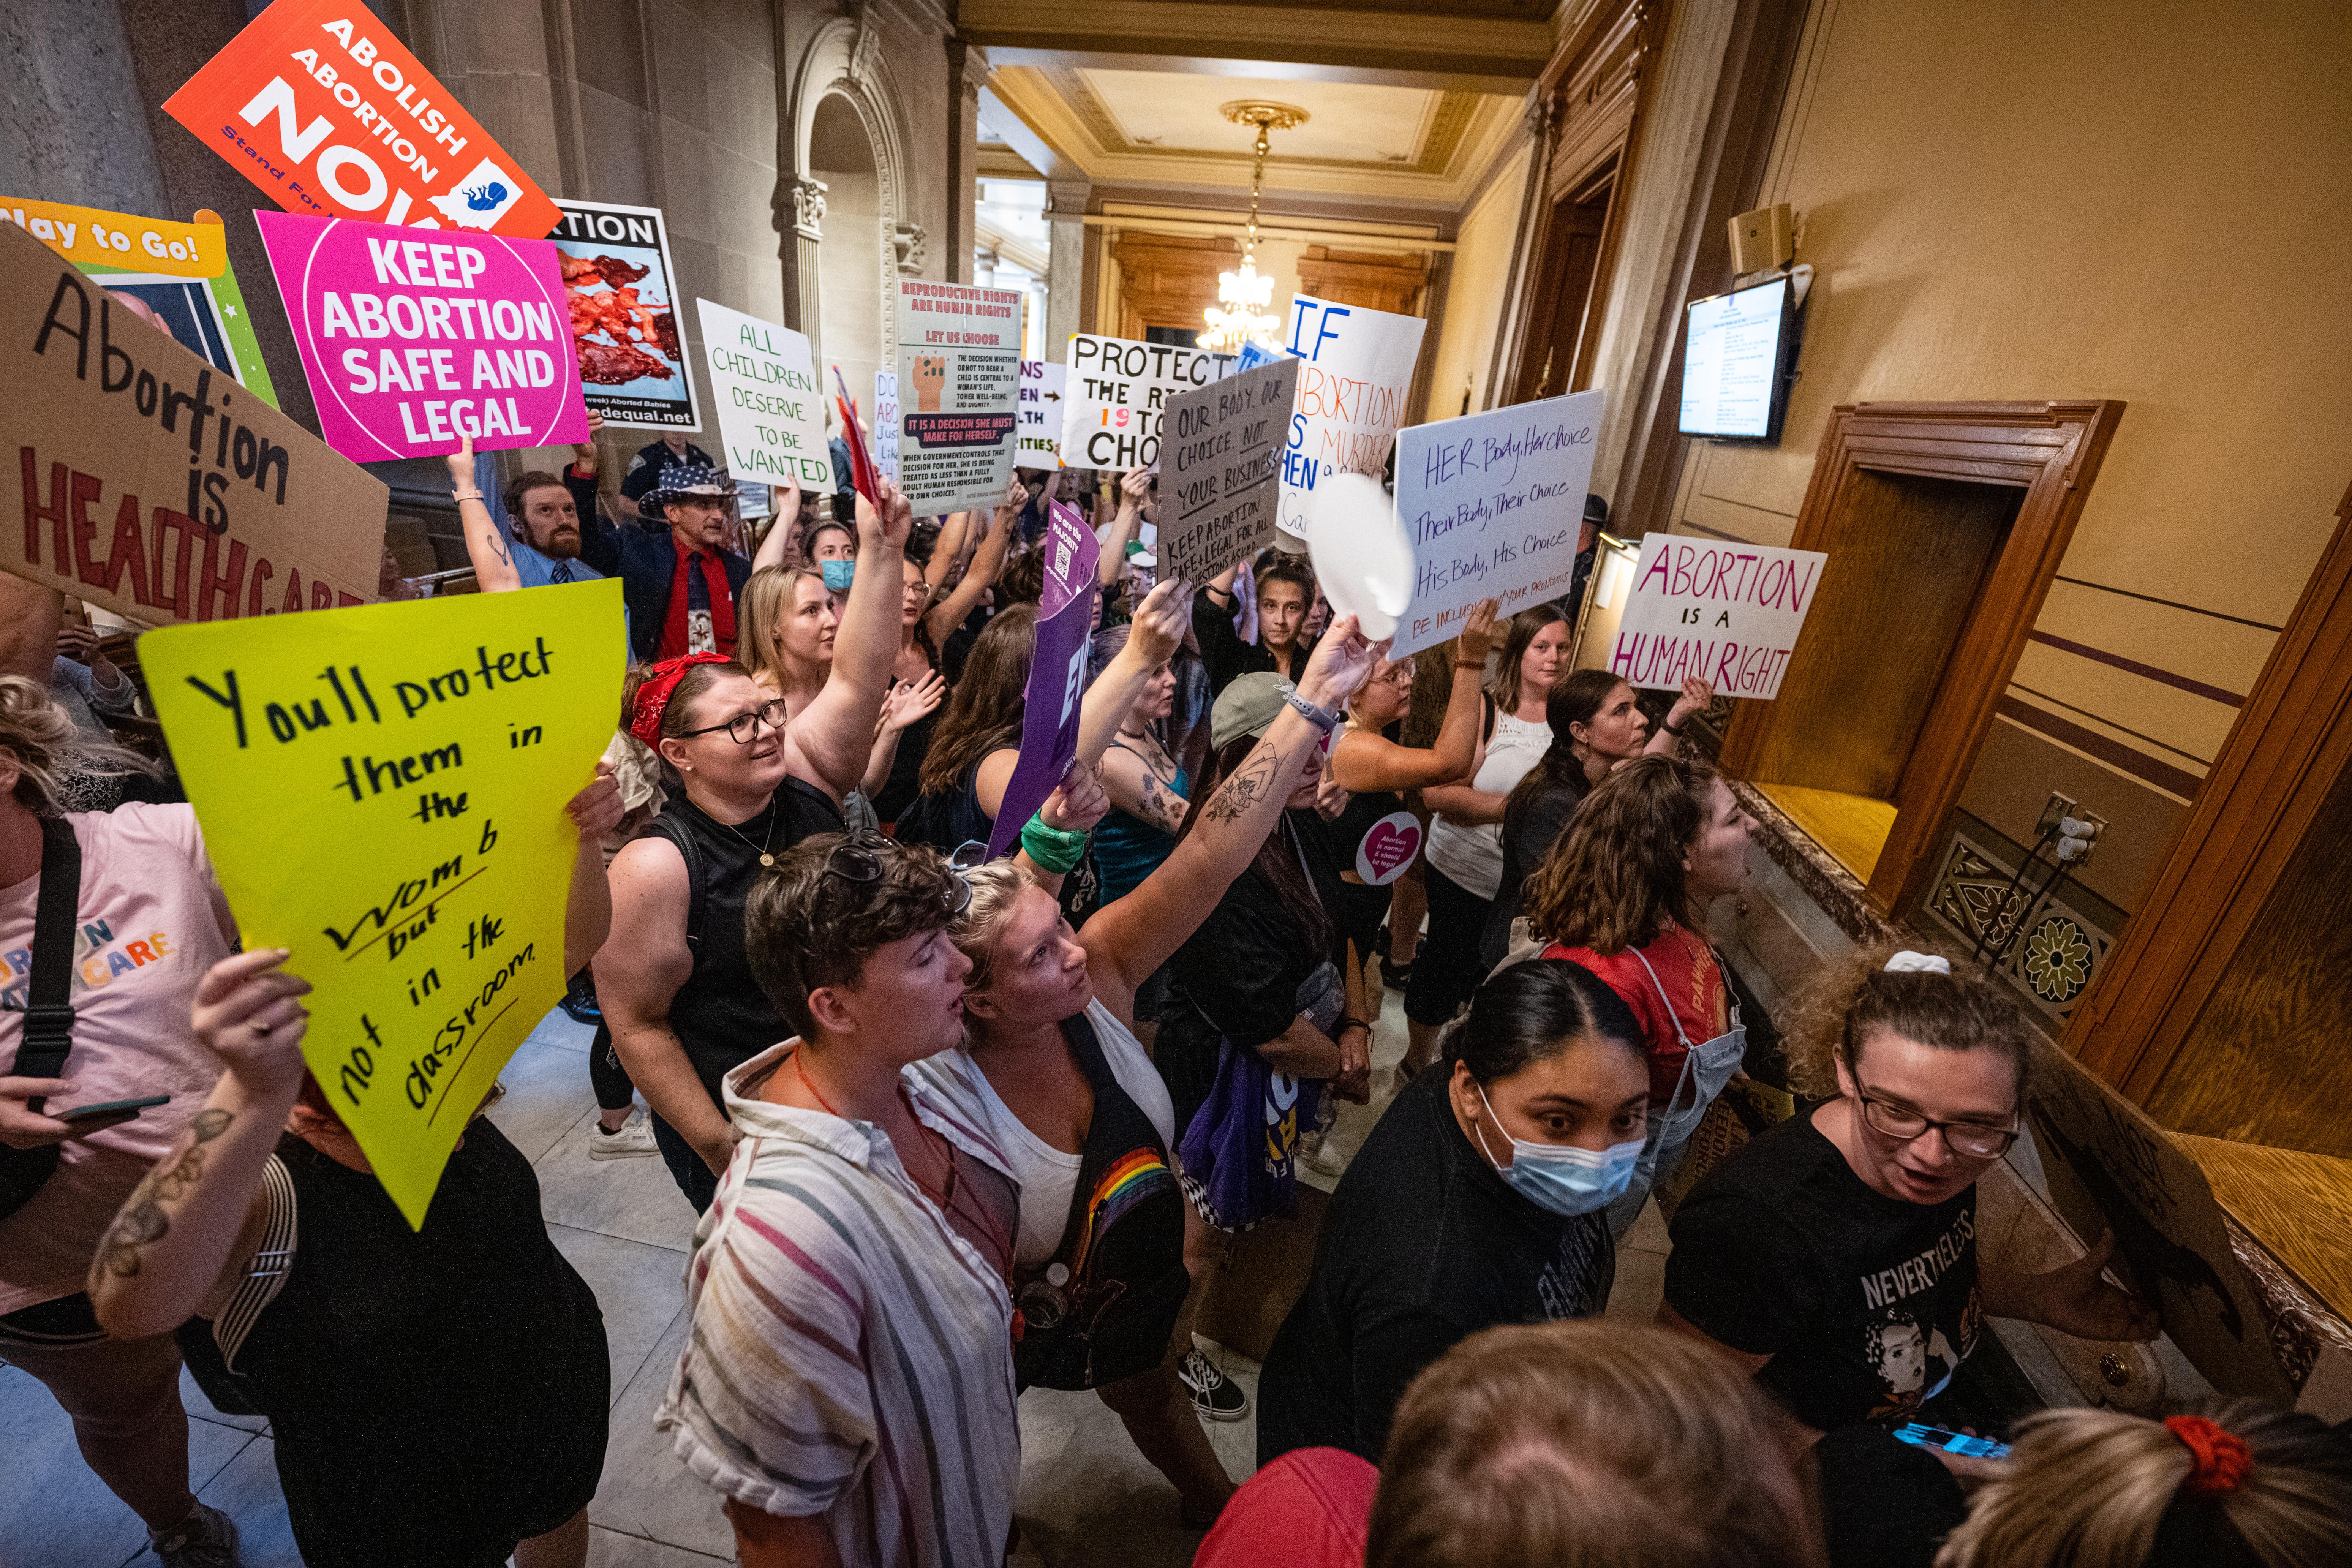 Dozens of abortion protesters carry signs in a hallway of a state legislature. 